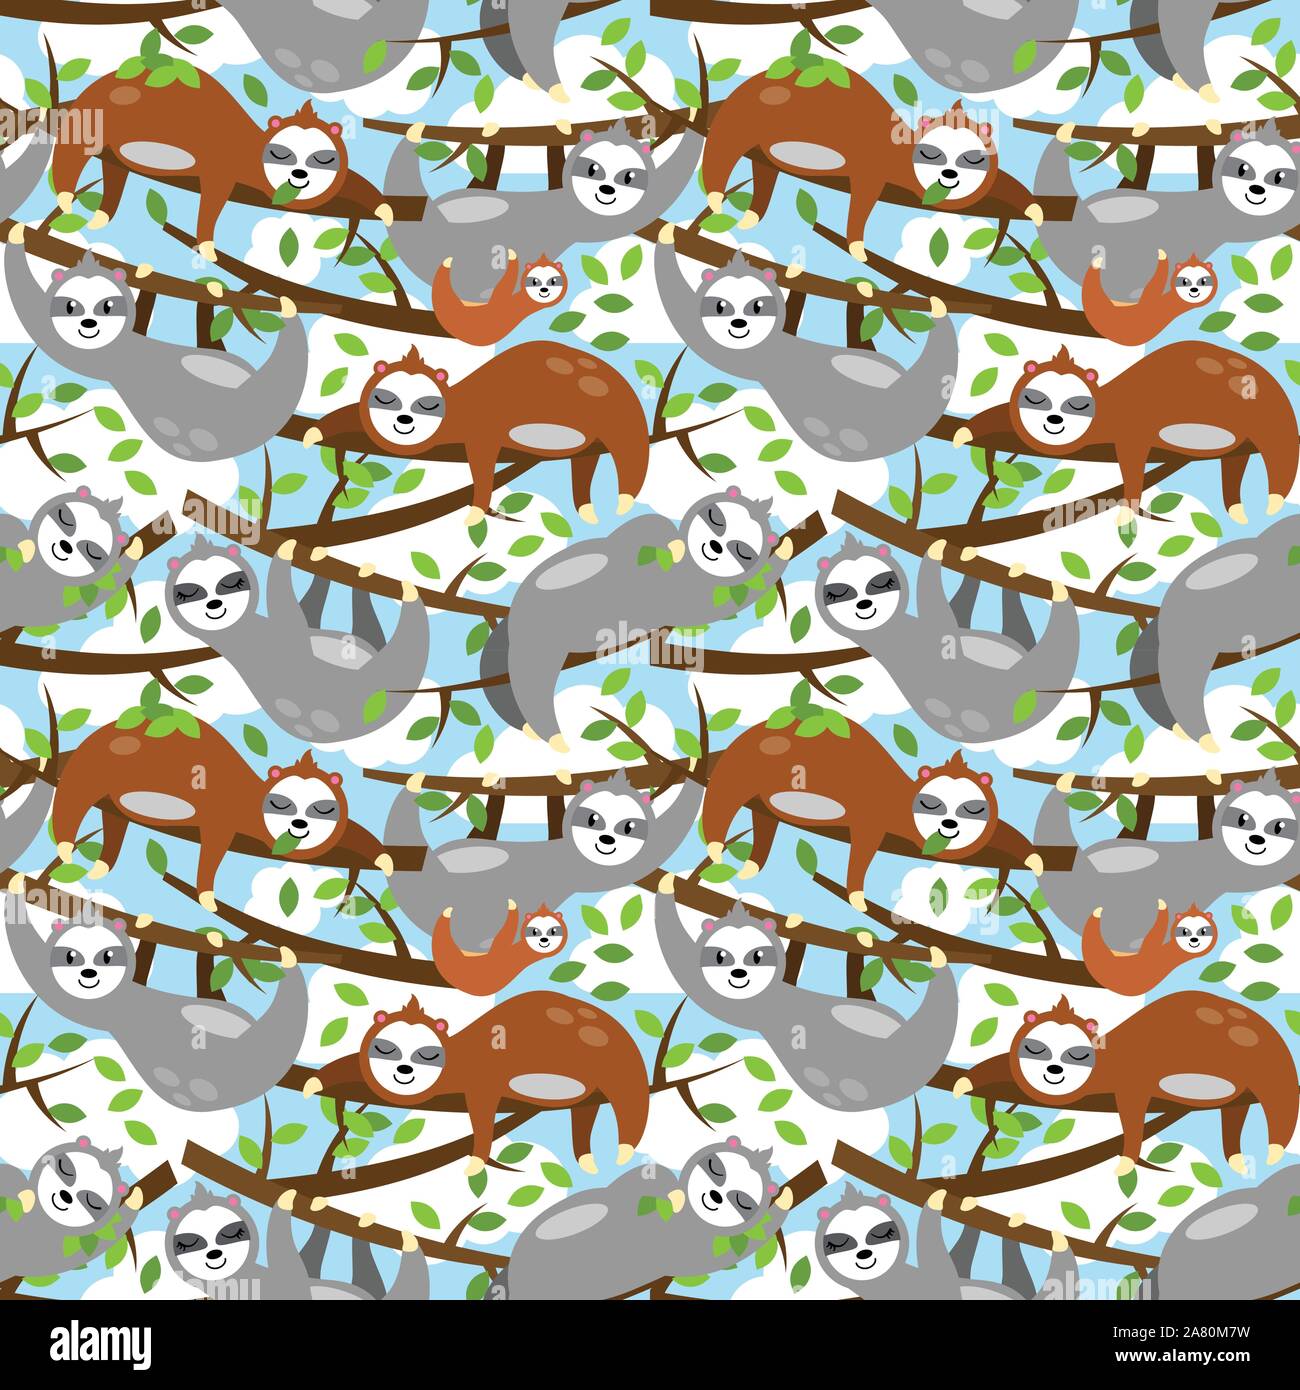 Seamless Vector Background with Sloths, Tree Branches and Leaves Stock Vector